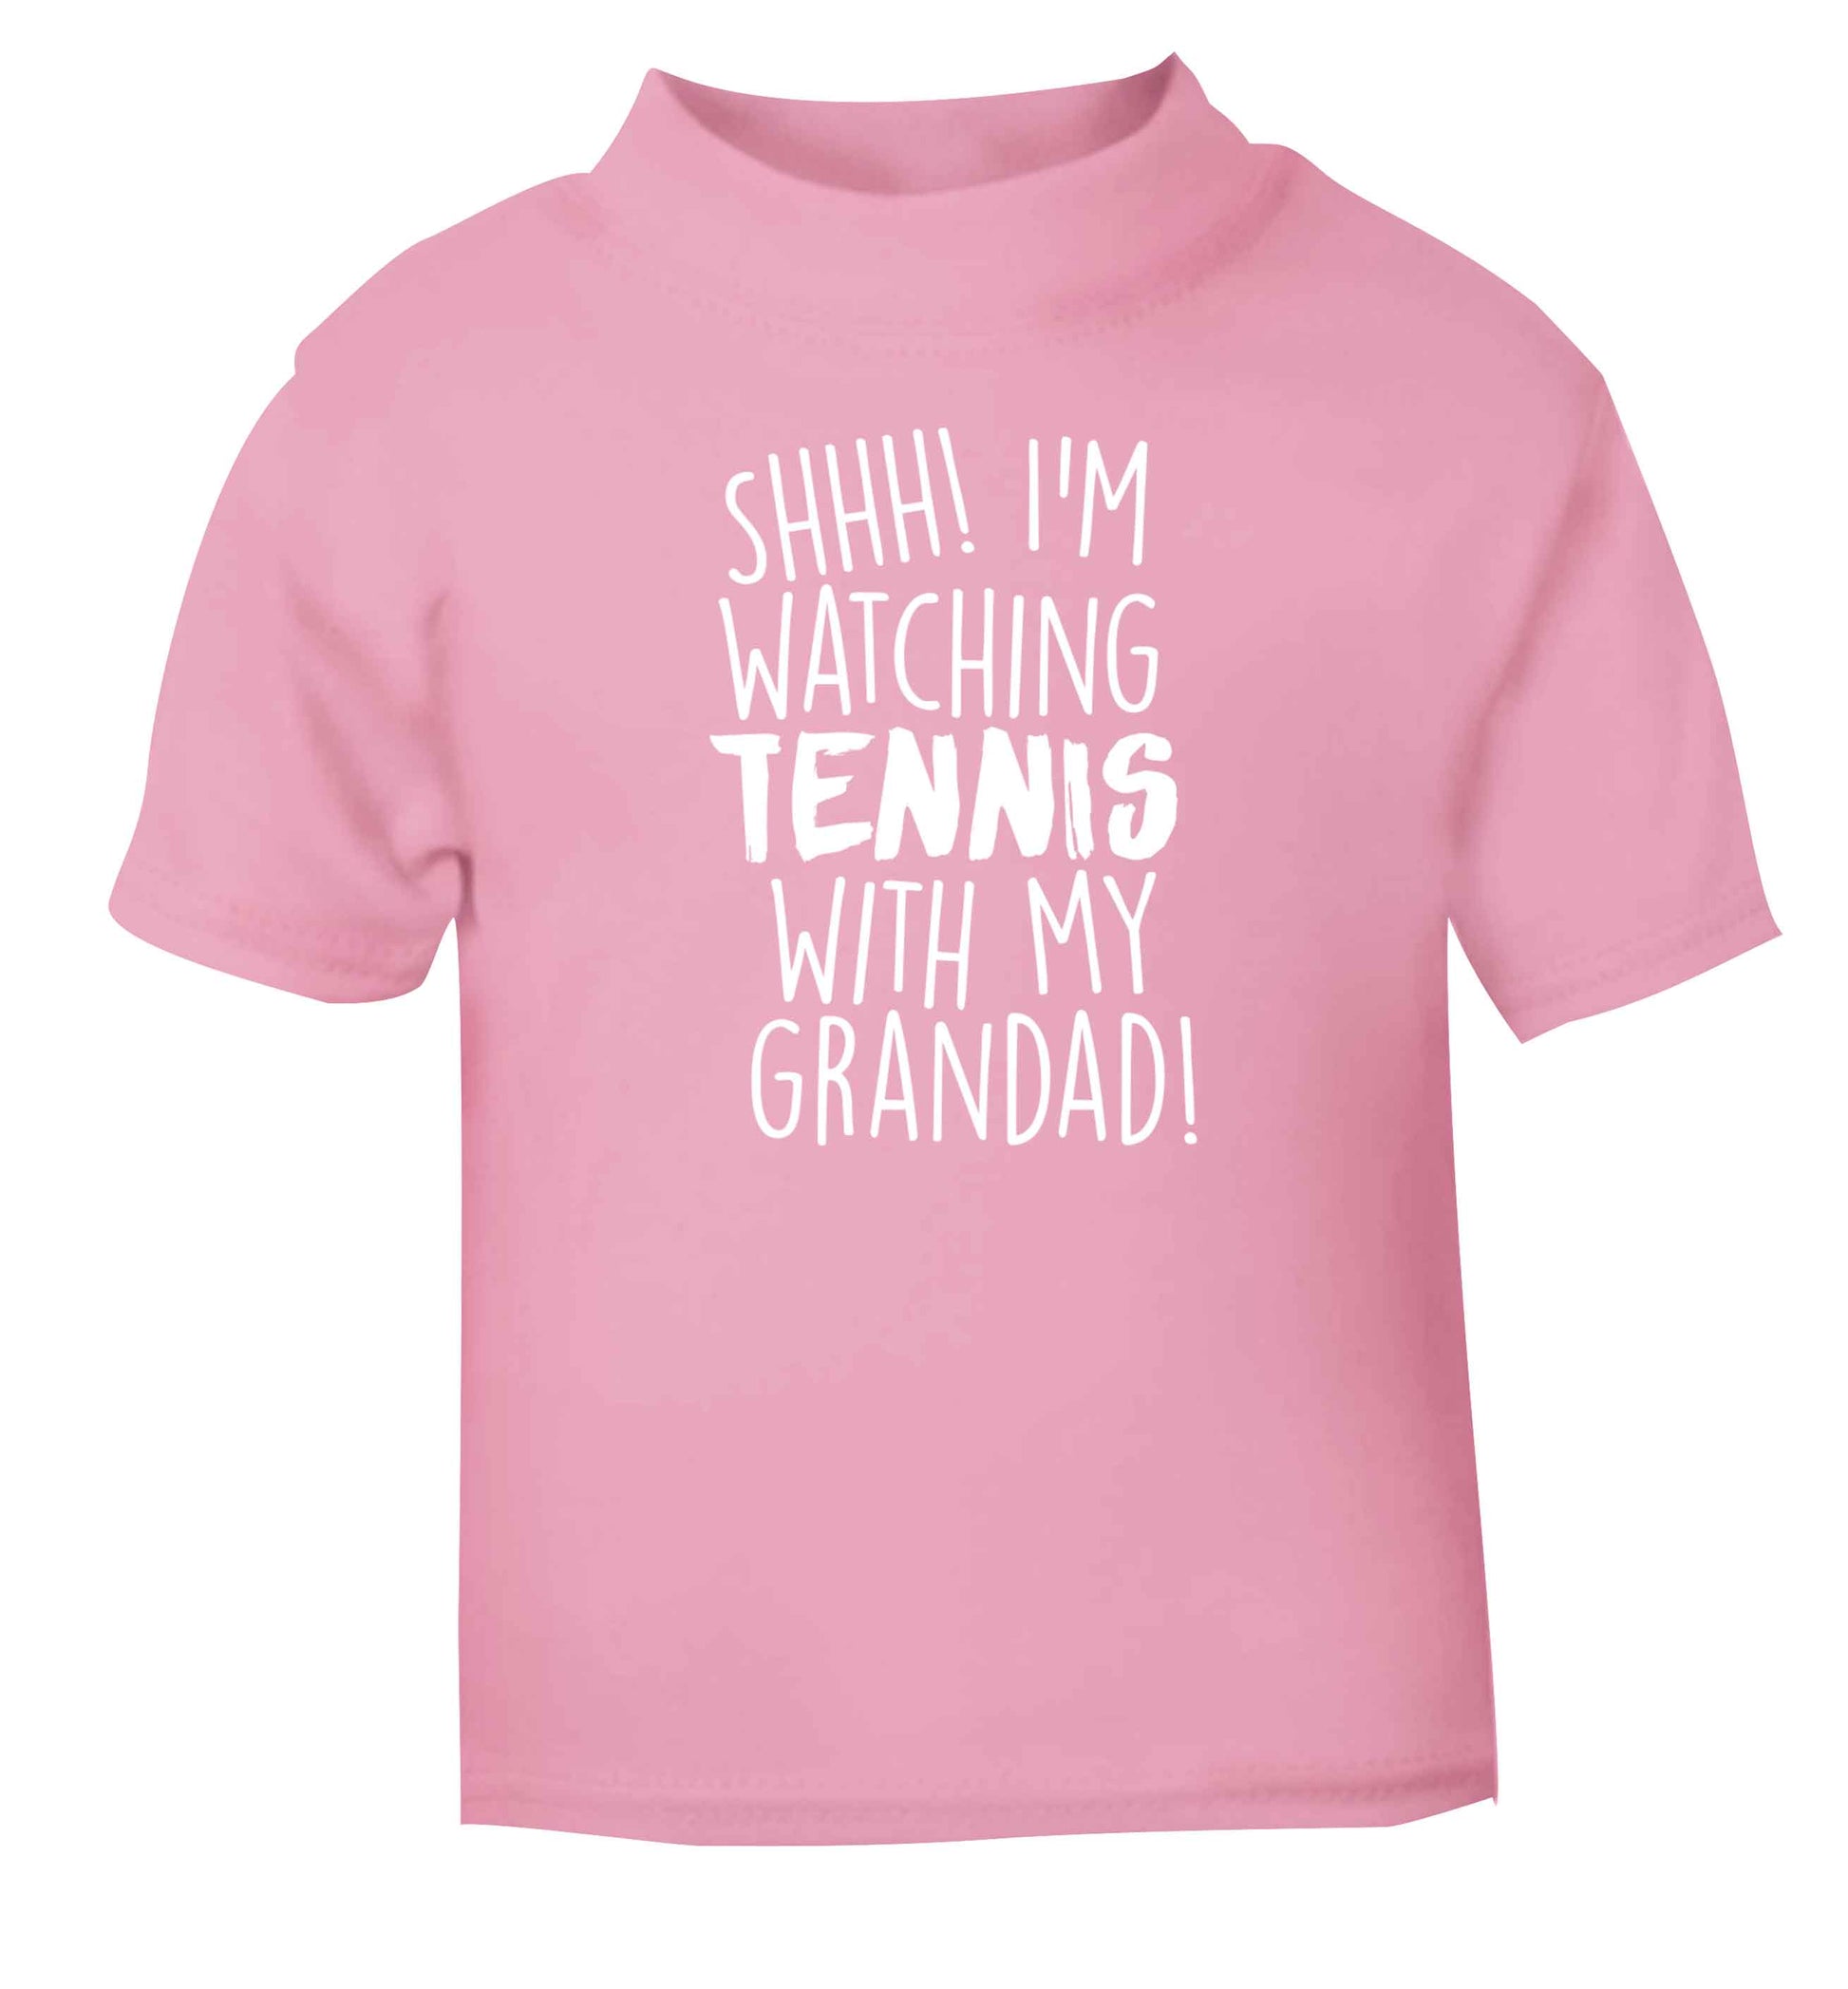 Shh! I'm watching tennis with my grandad! light pink Baby Toddler Tshirt 2 Years